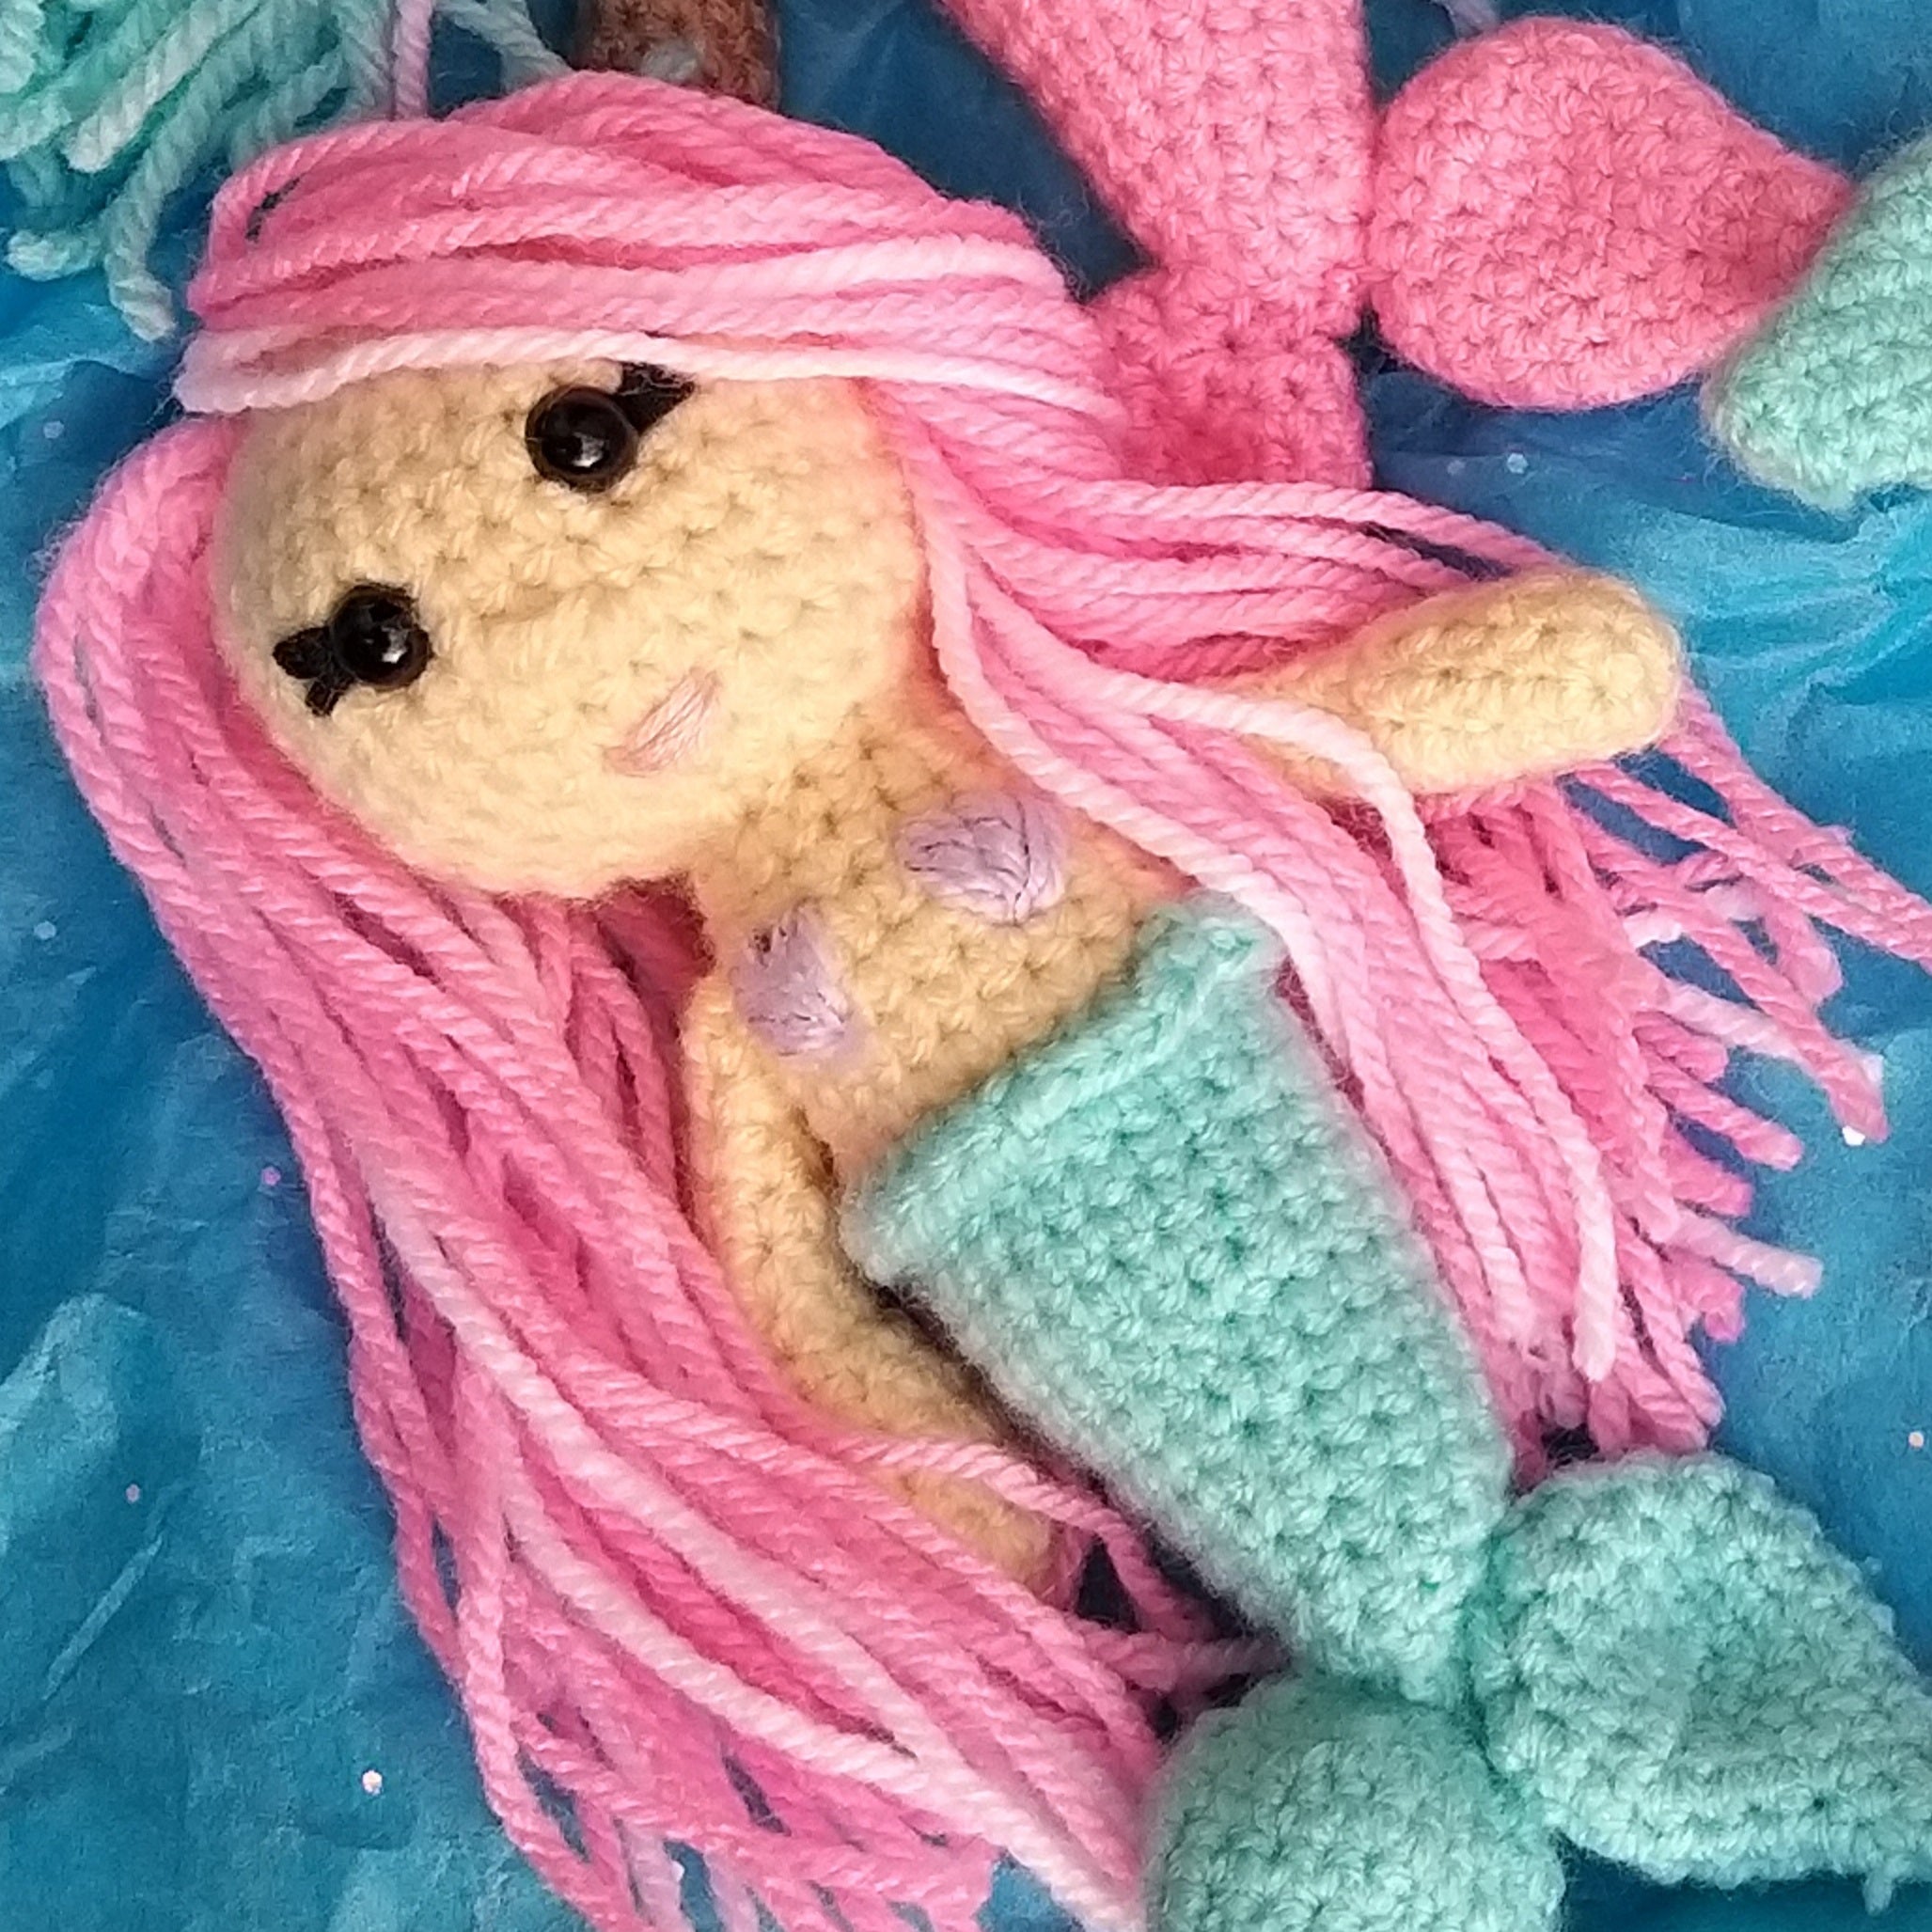 Adorable crocheted mini mermaids toy key rings in pink and teal with hair you can style, varying colored hair, skin and mermaid tails. Mini Mermaid Tails